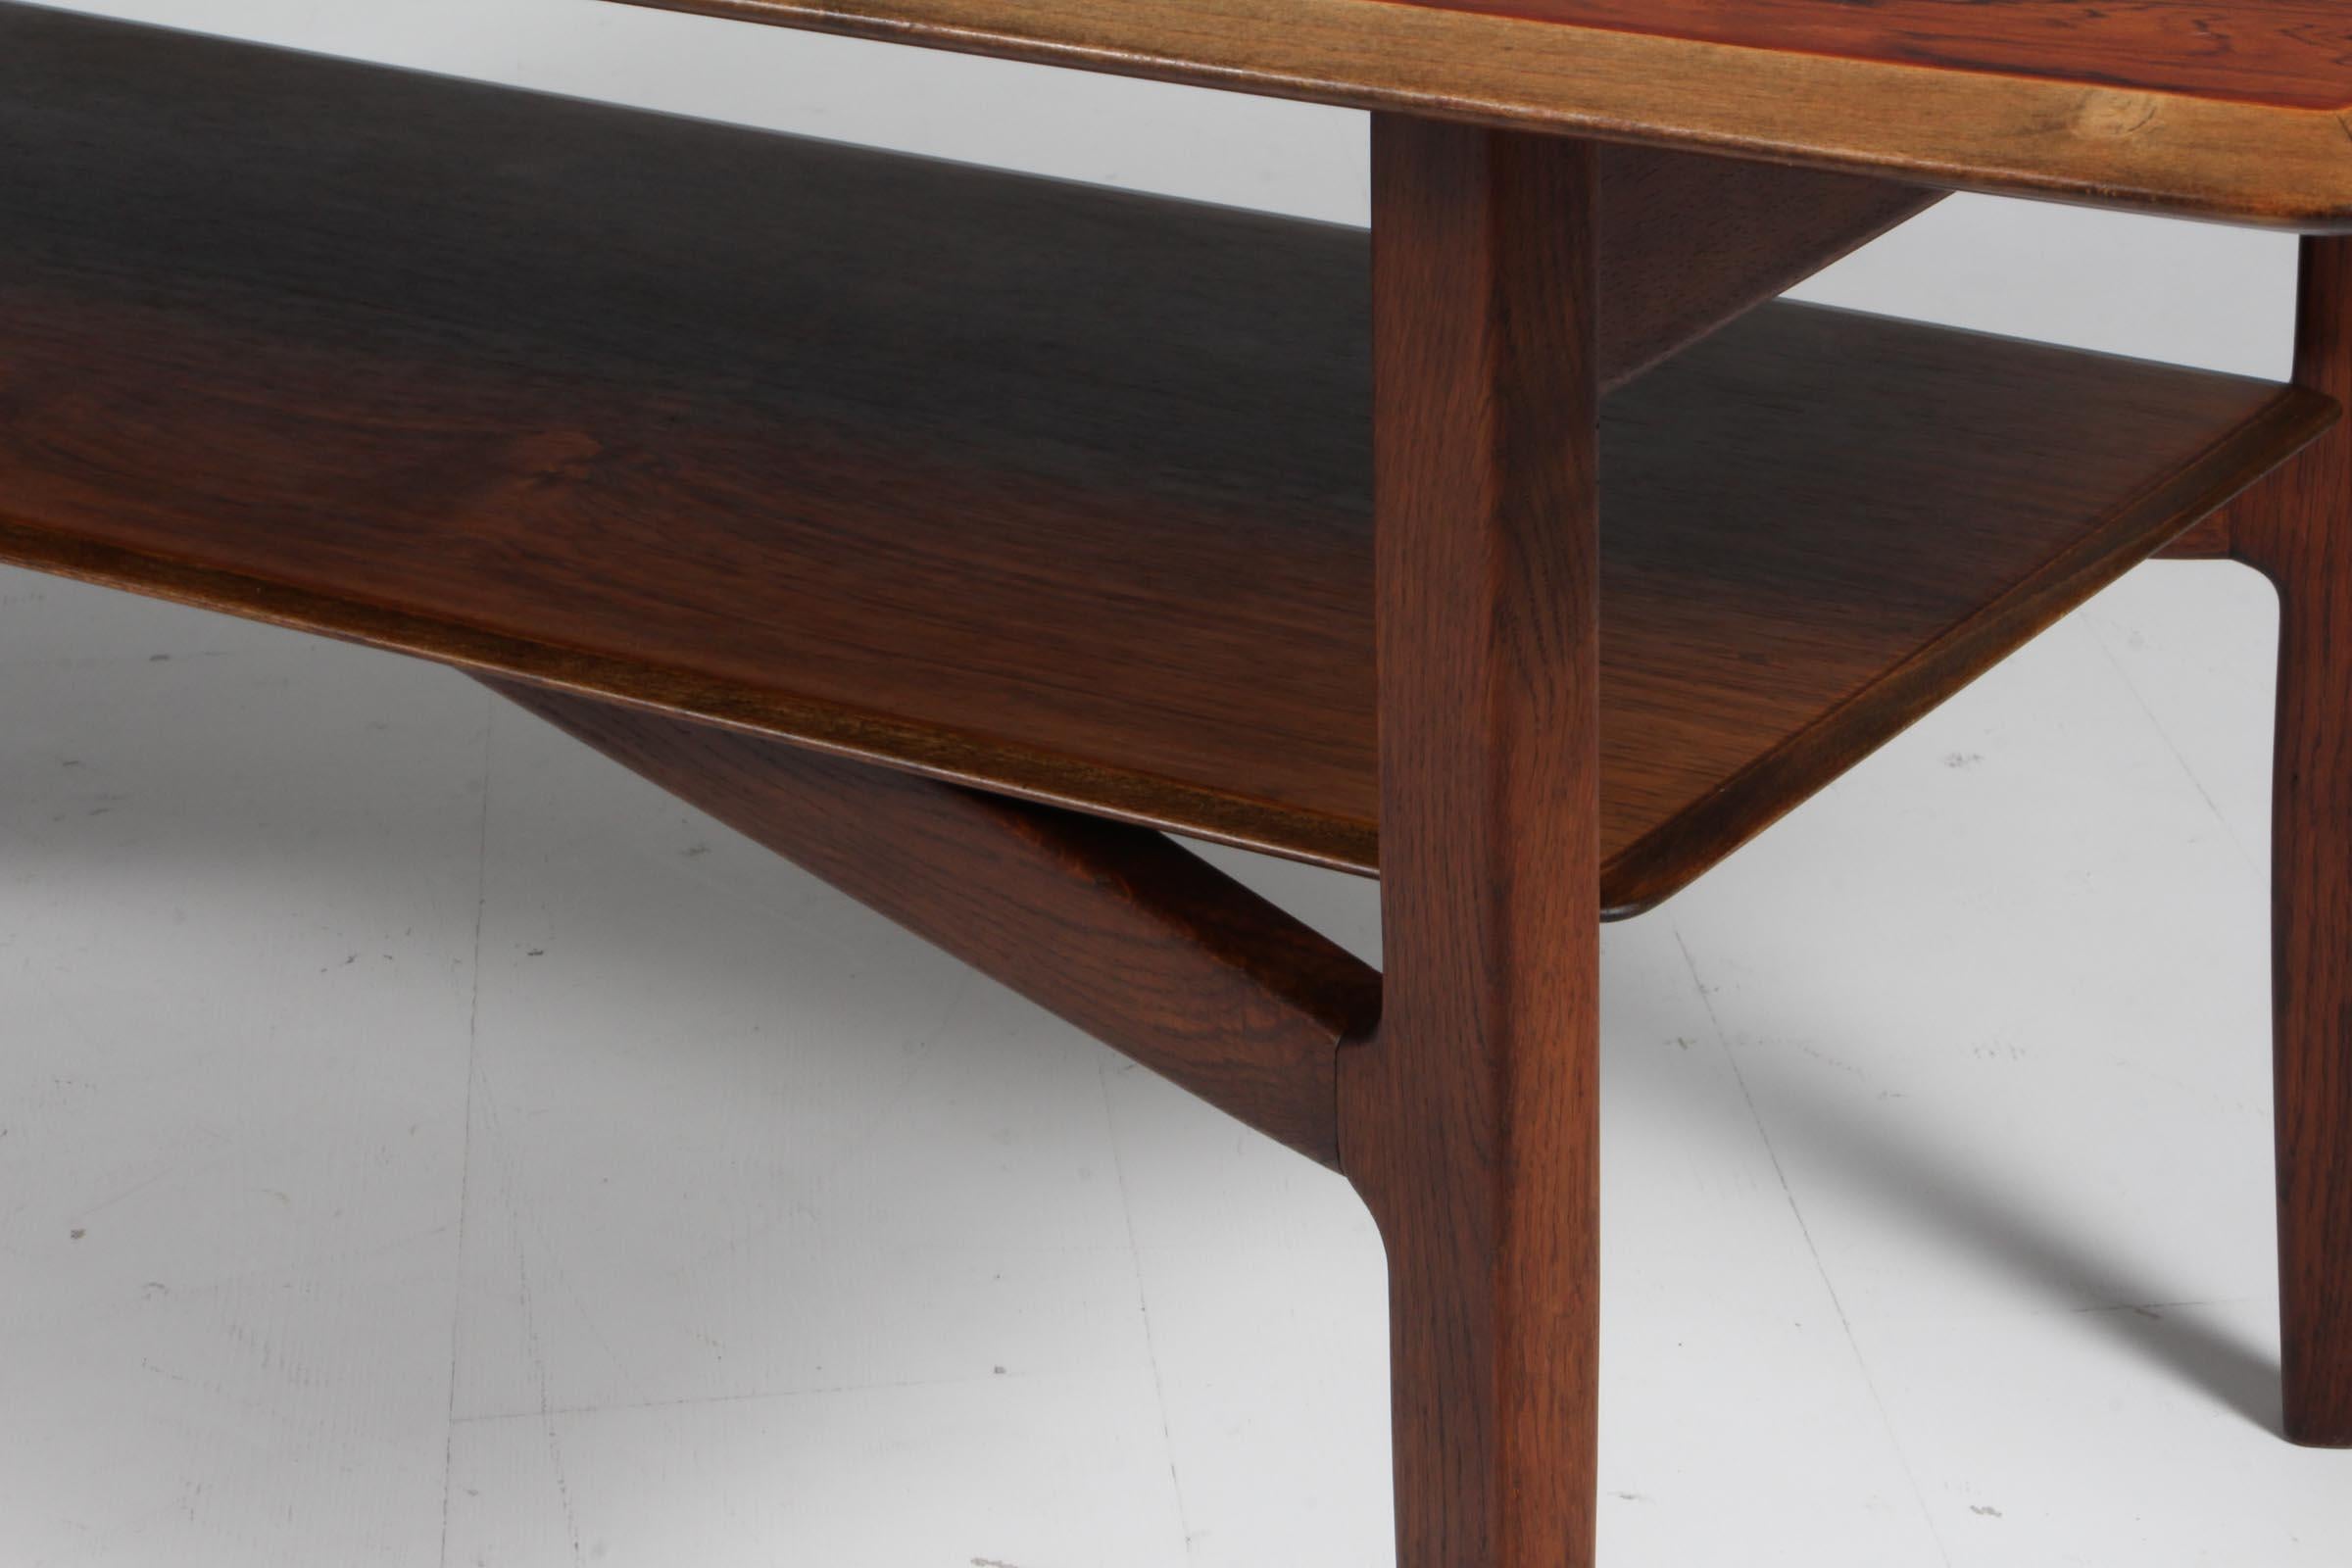 Ib Kofod-Larsen Sofa Table, oak and rosewood In Excellent Condition For Sale In Esbjerg, DK